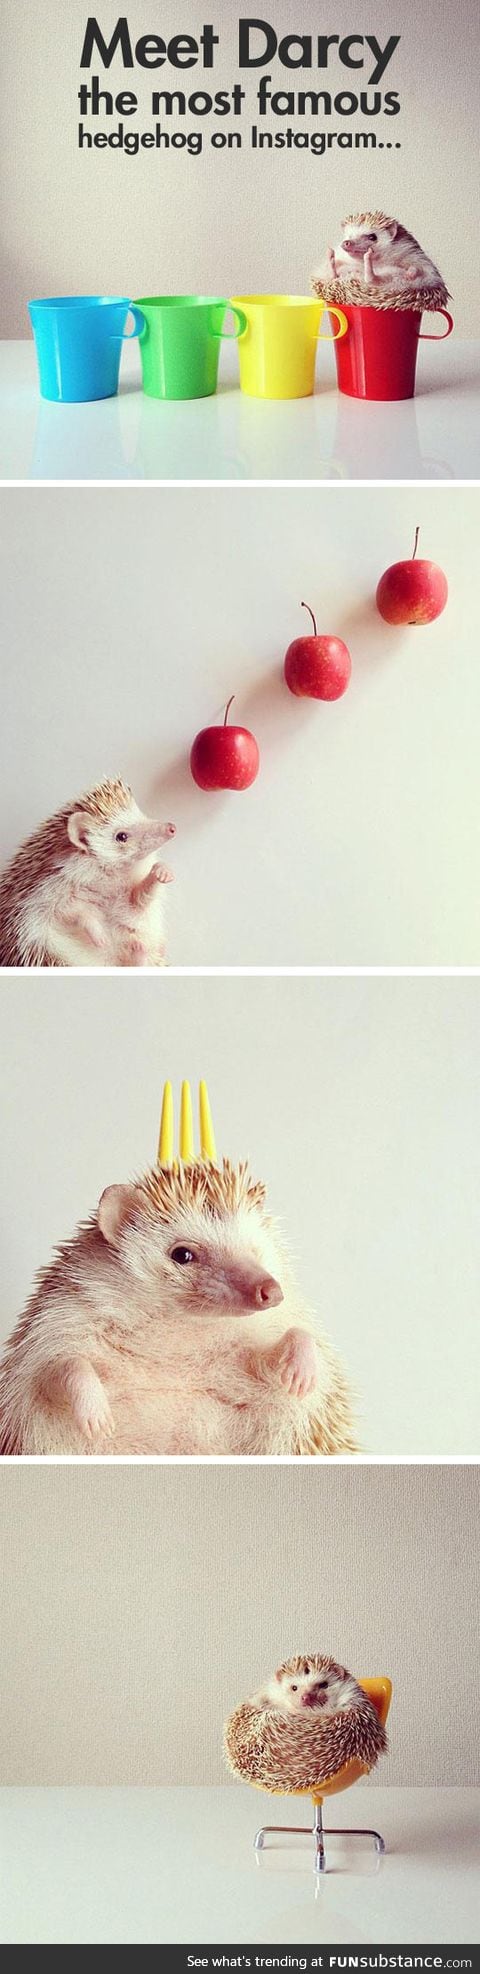 Darcy, the most famous hedgehog on the Internet